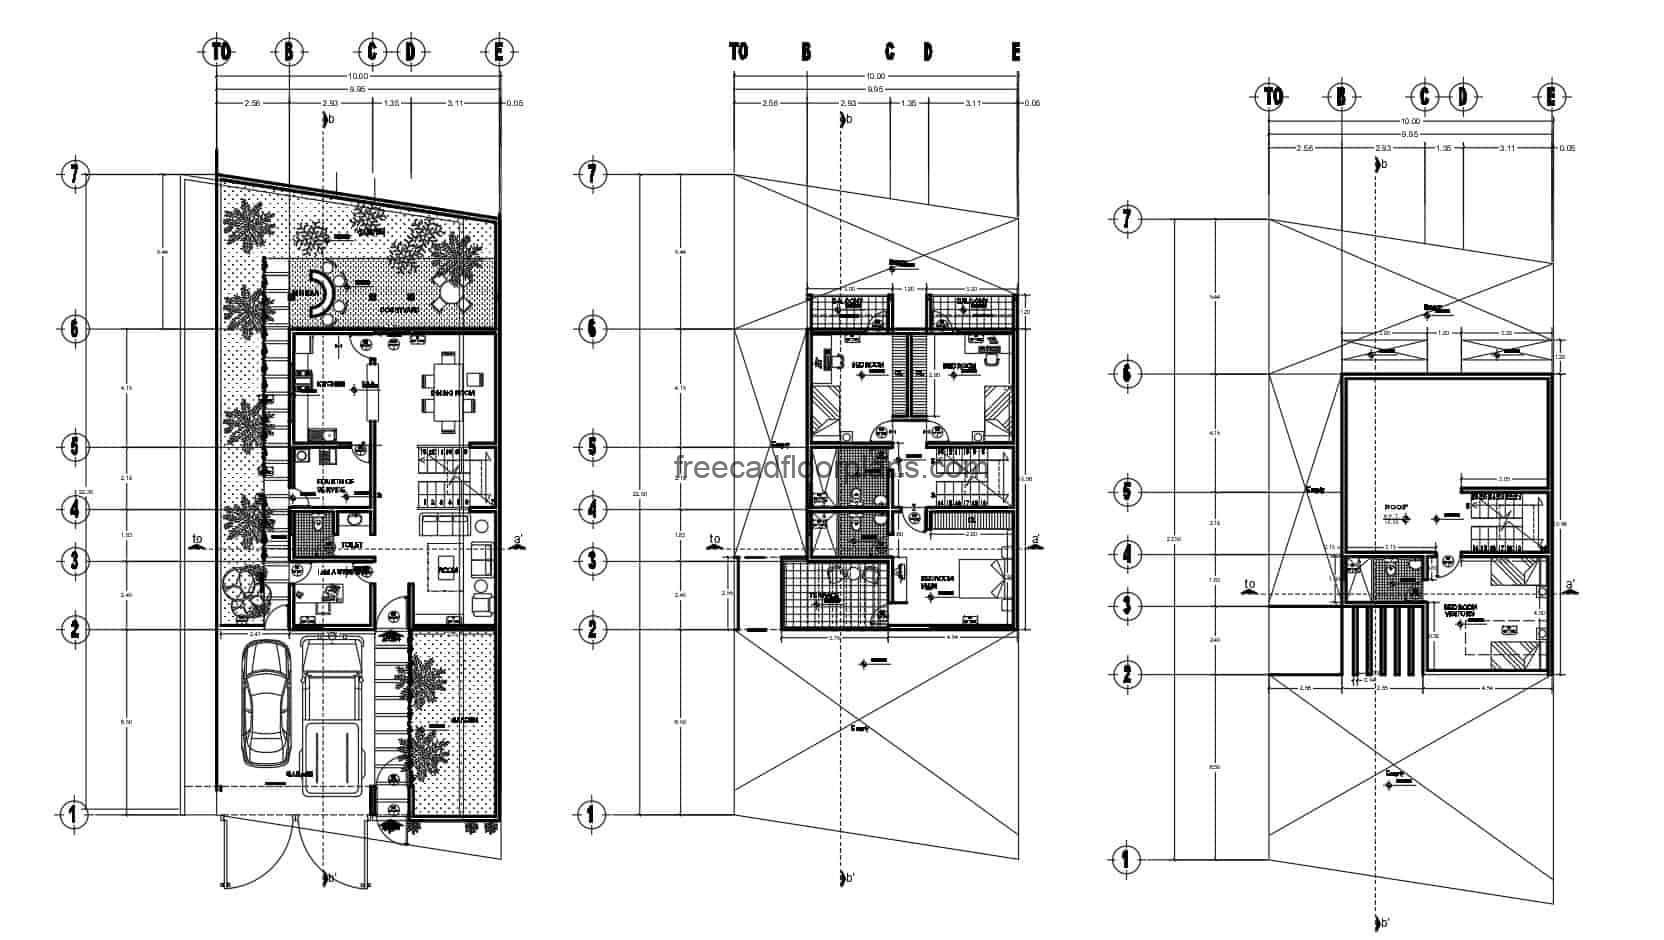 Complete plans developed in Autocad DWG format of simple house of three levels with four rooms in total. First level social area with living room, kitchen, dining room, laundry area and half bathroom, patio with minibar, second level three bedrooms each with balcony and two bathrooms and third level another bedroom with bathroom. 2D blueprints for free download.